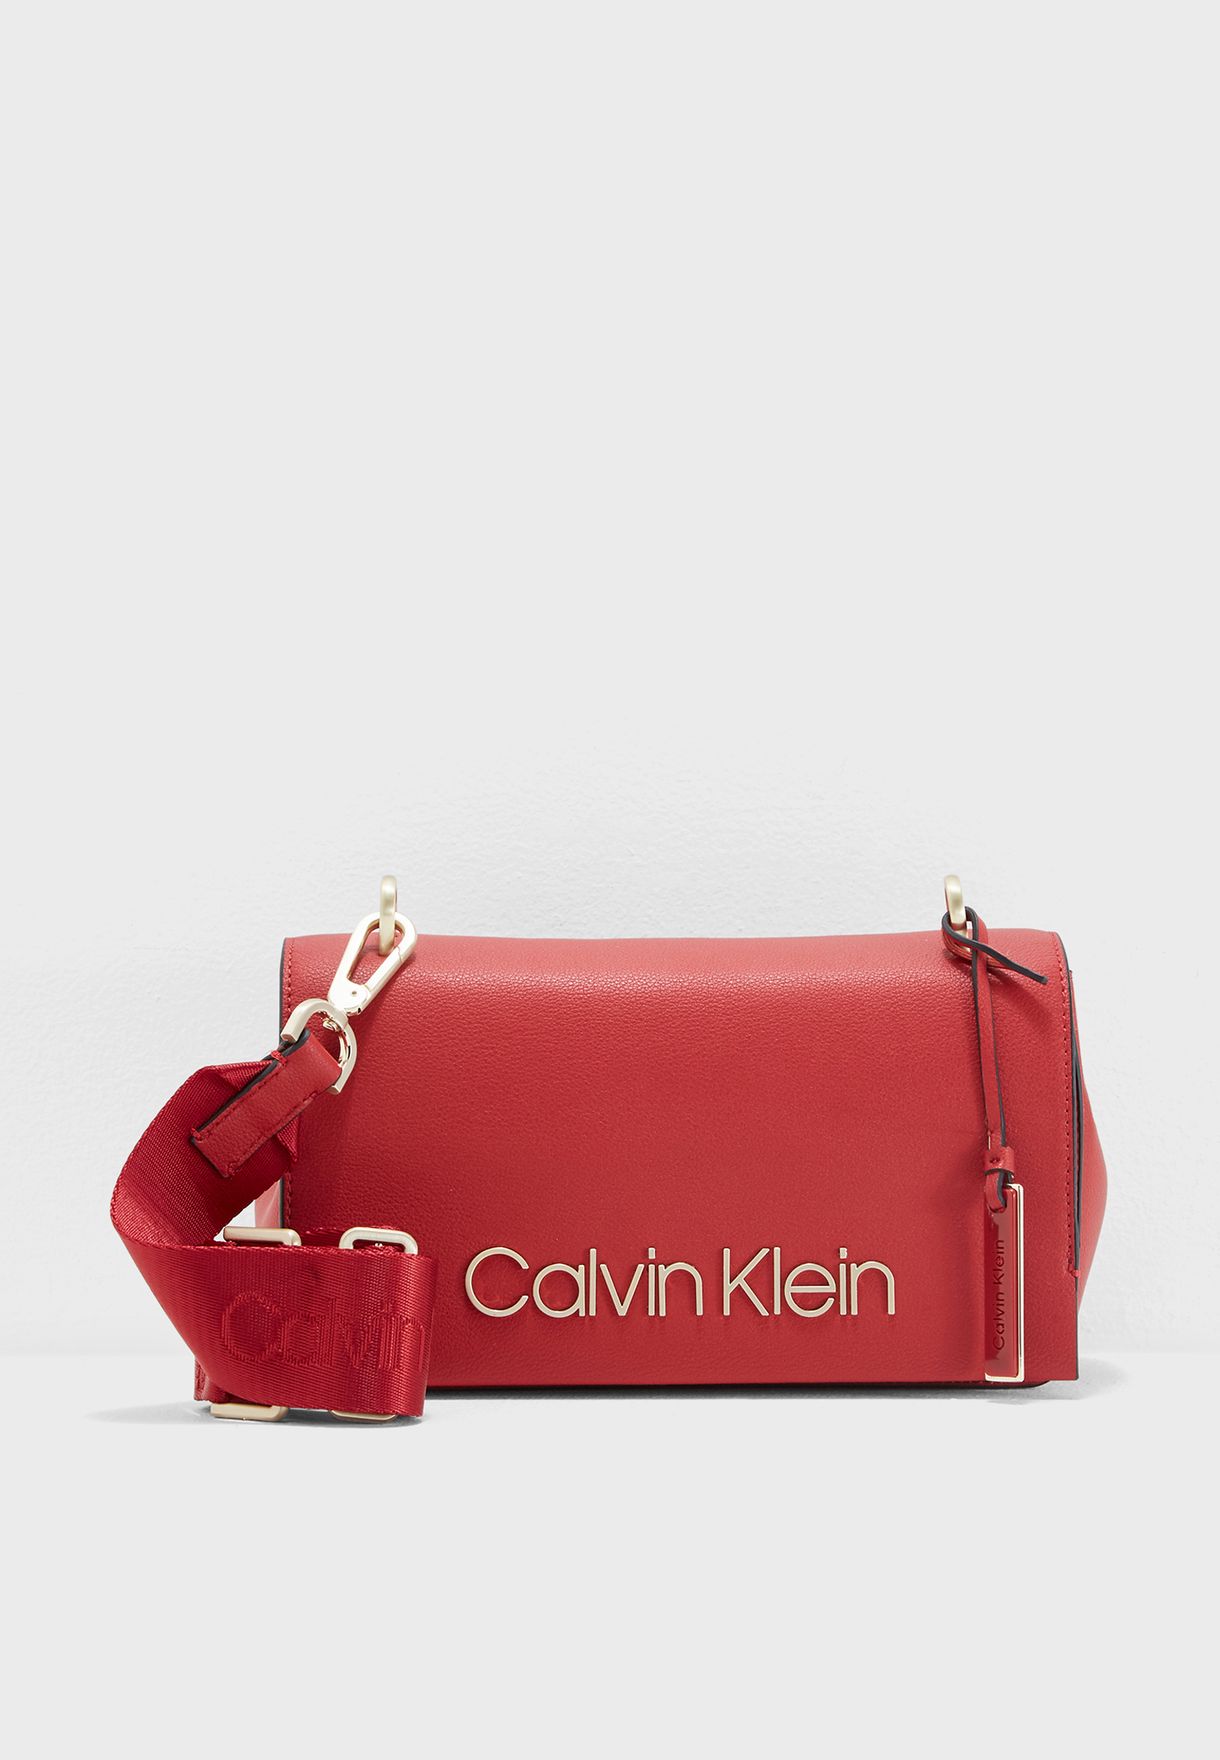 nationalism Volcano purity Buy Calvin Klein red Large Candy Shoulder Crossbody for Women in MENA,  Worldwide